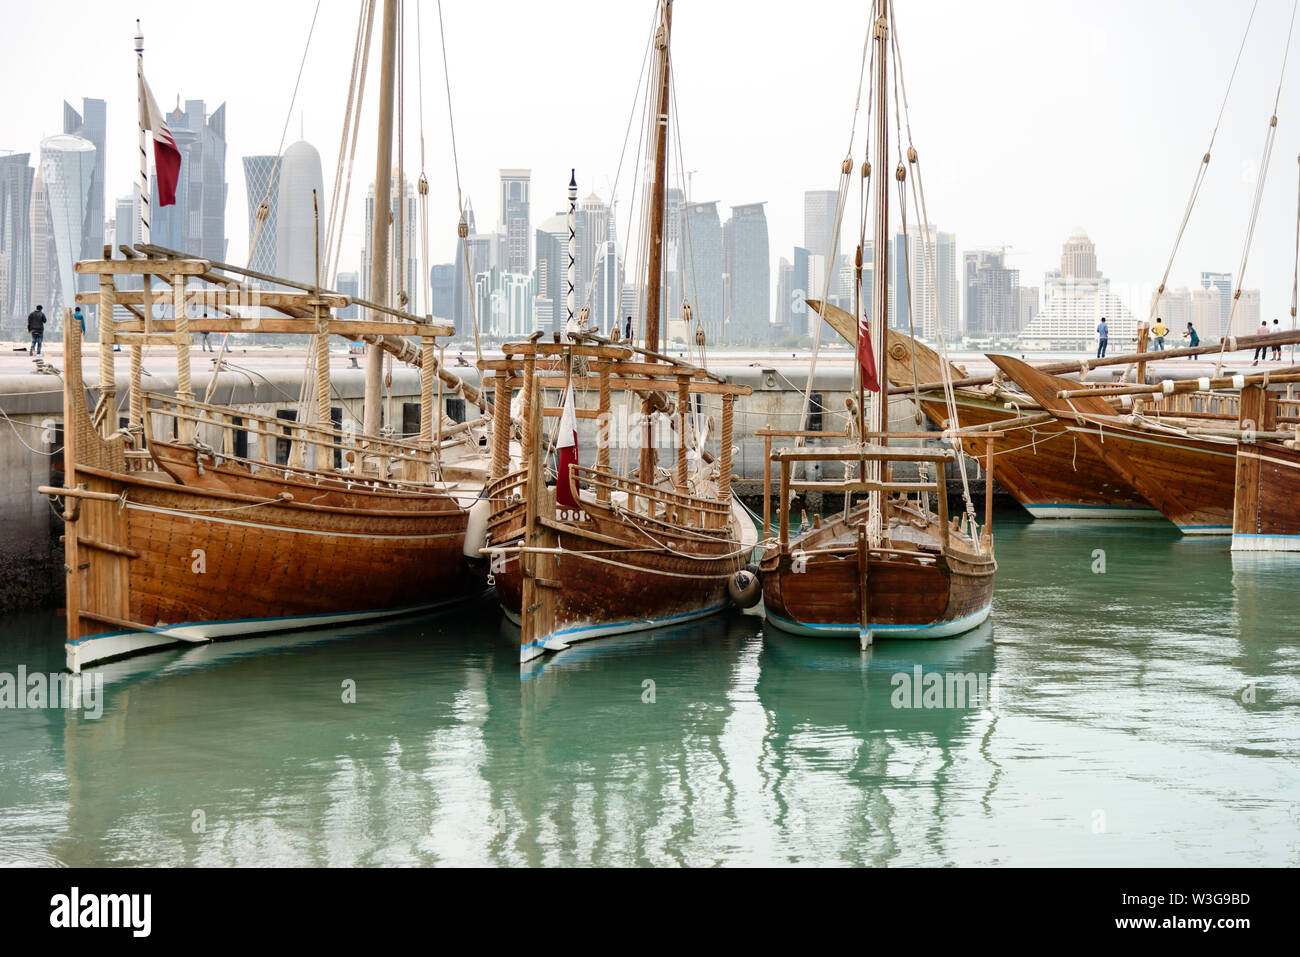 Traditional dhows with flags of Qatar are docked in harbor of Doha, such vessels are popular for tourist trips along the coast, Qatar, Middle East. Stock Photo